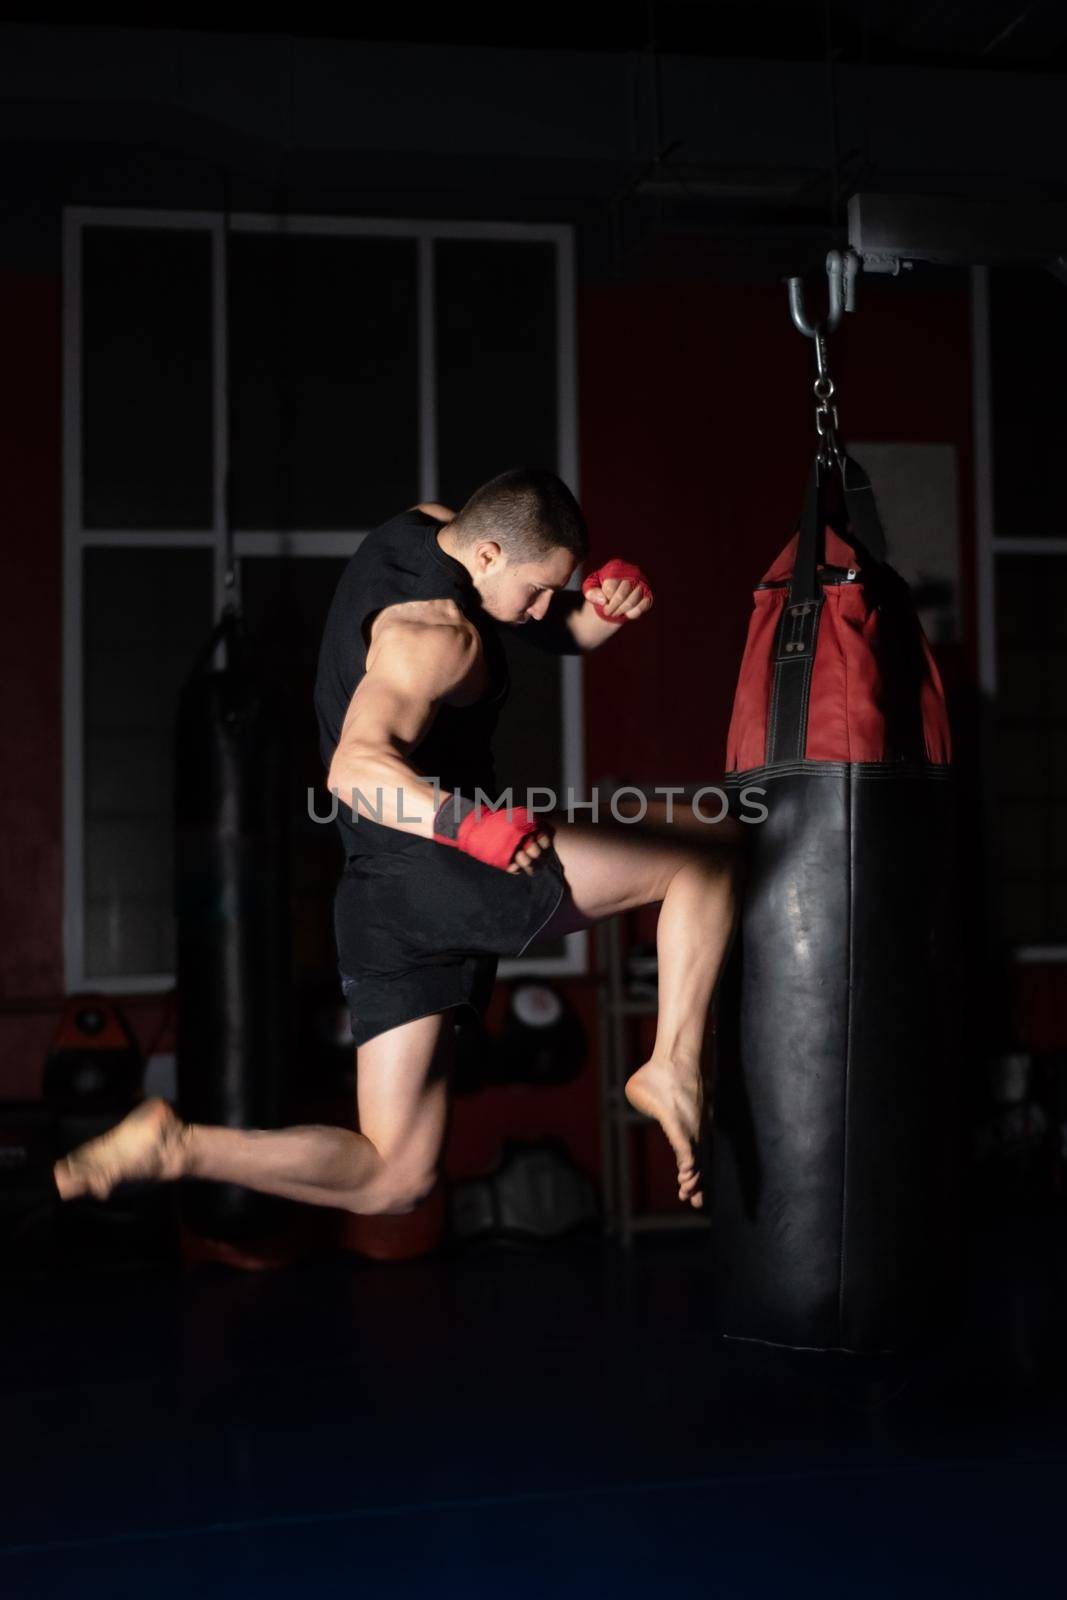 Kickboxing fighter Performing Jumping Air Kicks with Knee on Punch Bag. Caucasian Man Practicing Martial Arts Training at Urban Gym. by HERRAEZ